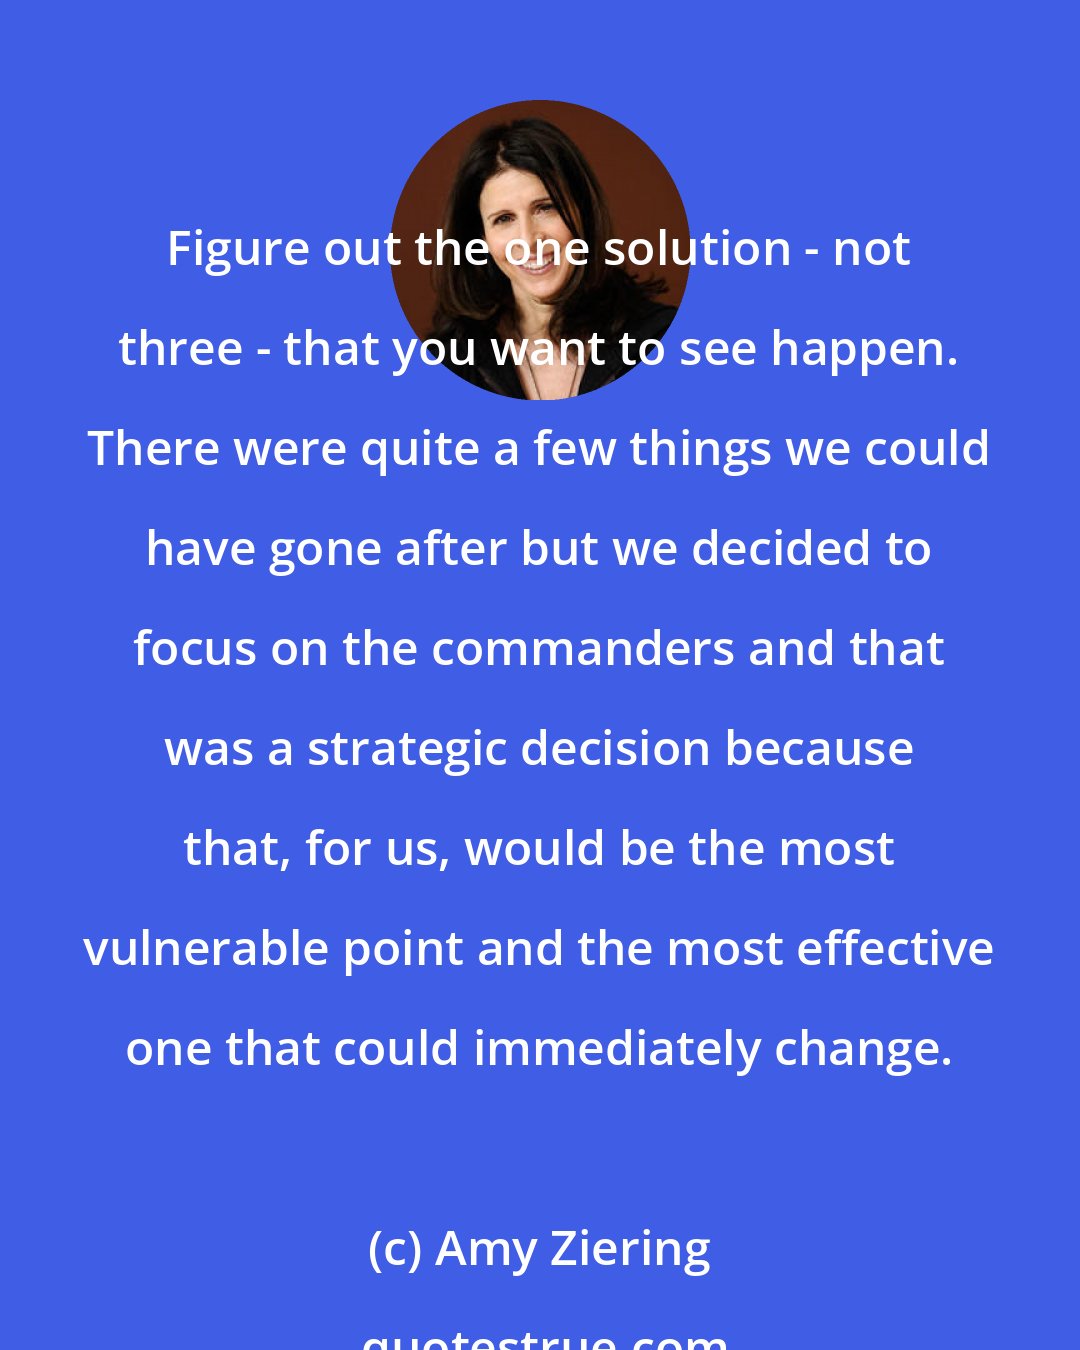 Amy Ziering: Figure out the one solution - not three - that you want to see happen. There were quite a few things we could have gone after but we decided to focus on the commanders and that was a strategic decision because that, for us, would be the most vulnerable point and the most effective one that could immediately change.